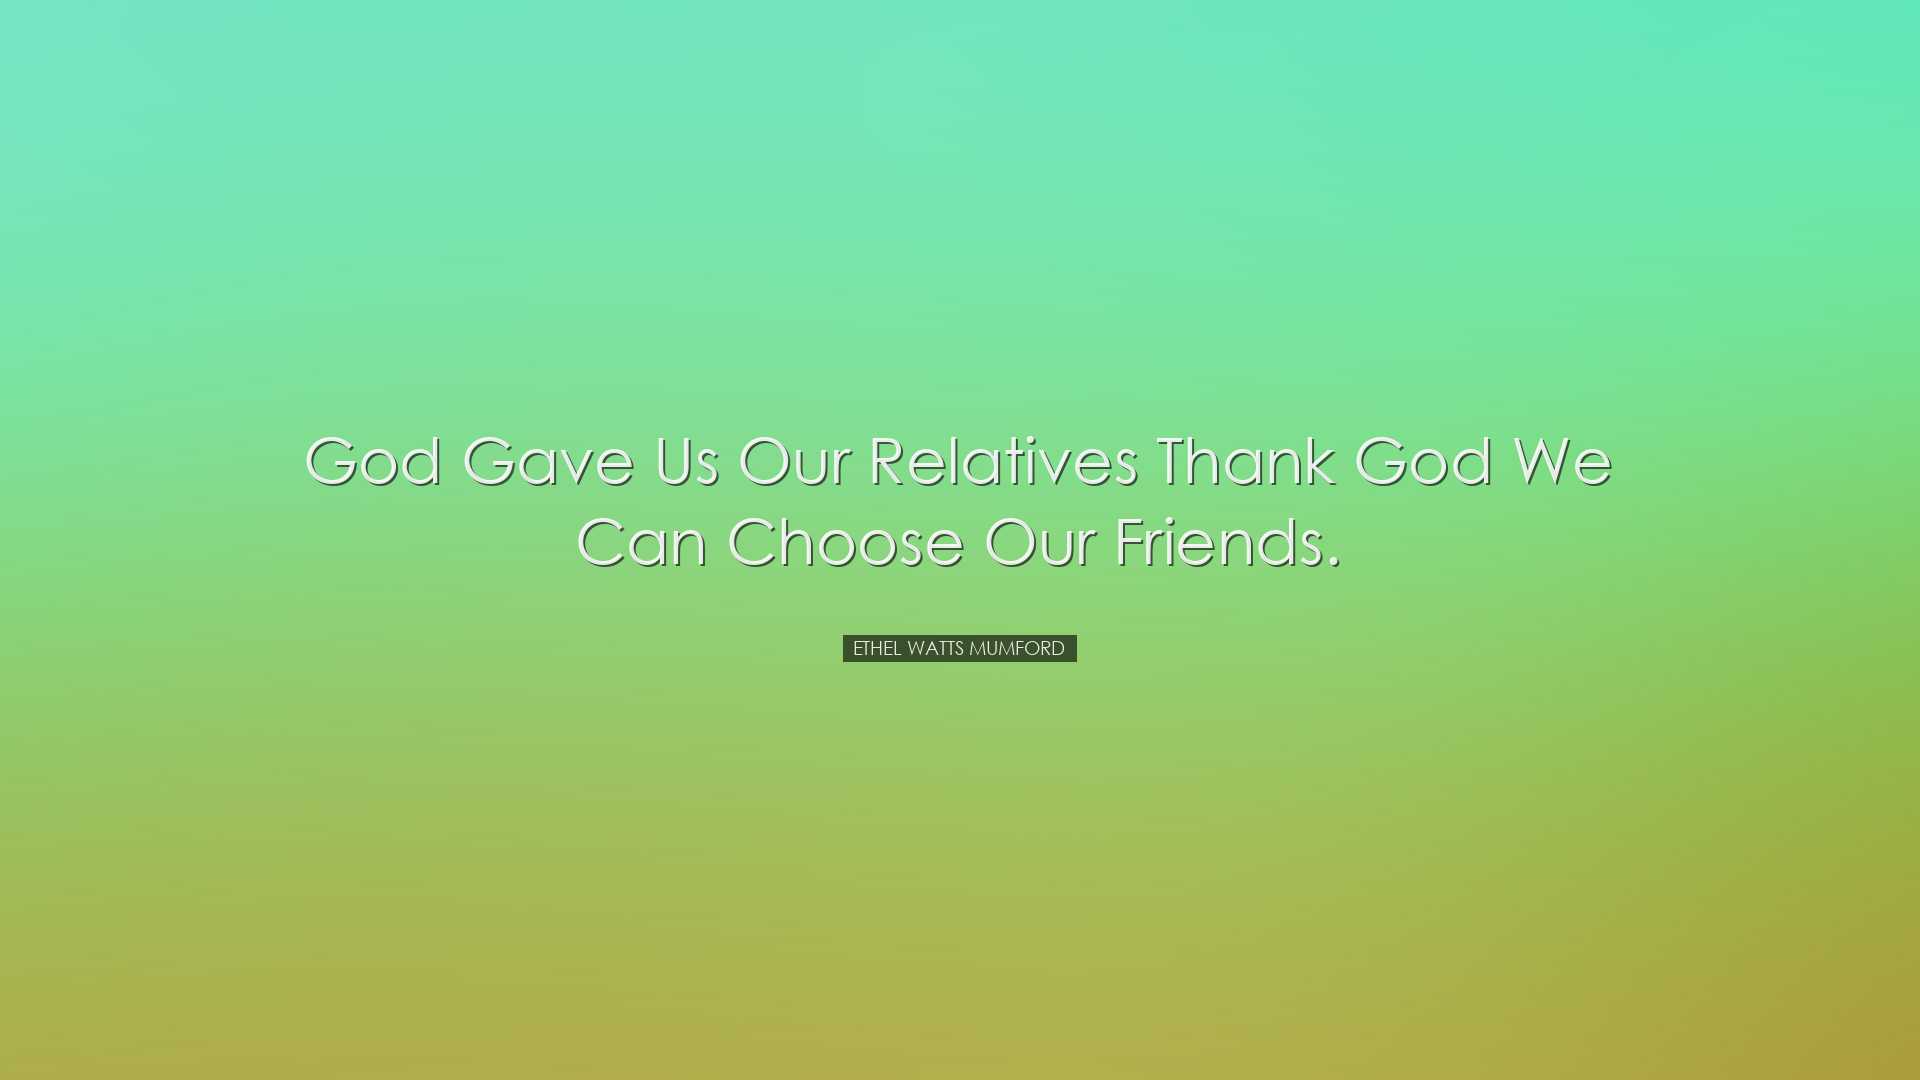 God gave us our relatives thank God we can choose our friends. - E